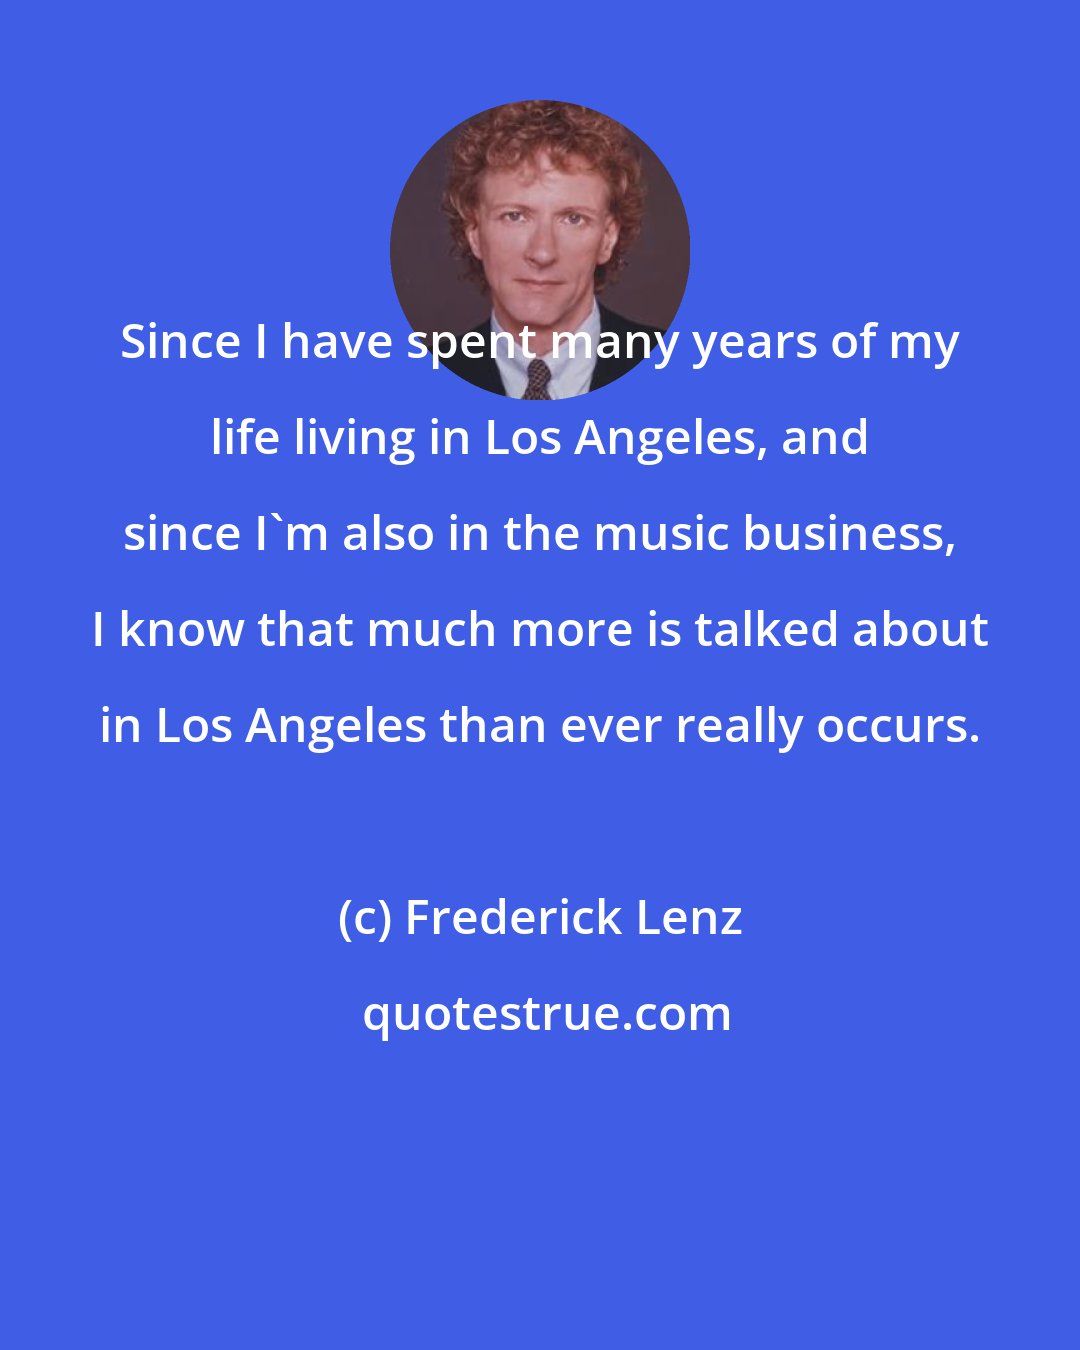 Frederick Lenz: Since I have spent many years of my life living in Los Angeles, and since I'm also in the music business, I know that much more is talked about in Los Angeles than ever really occurs.